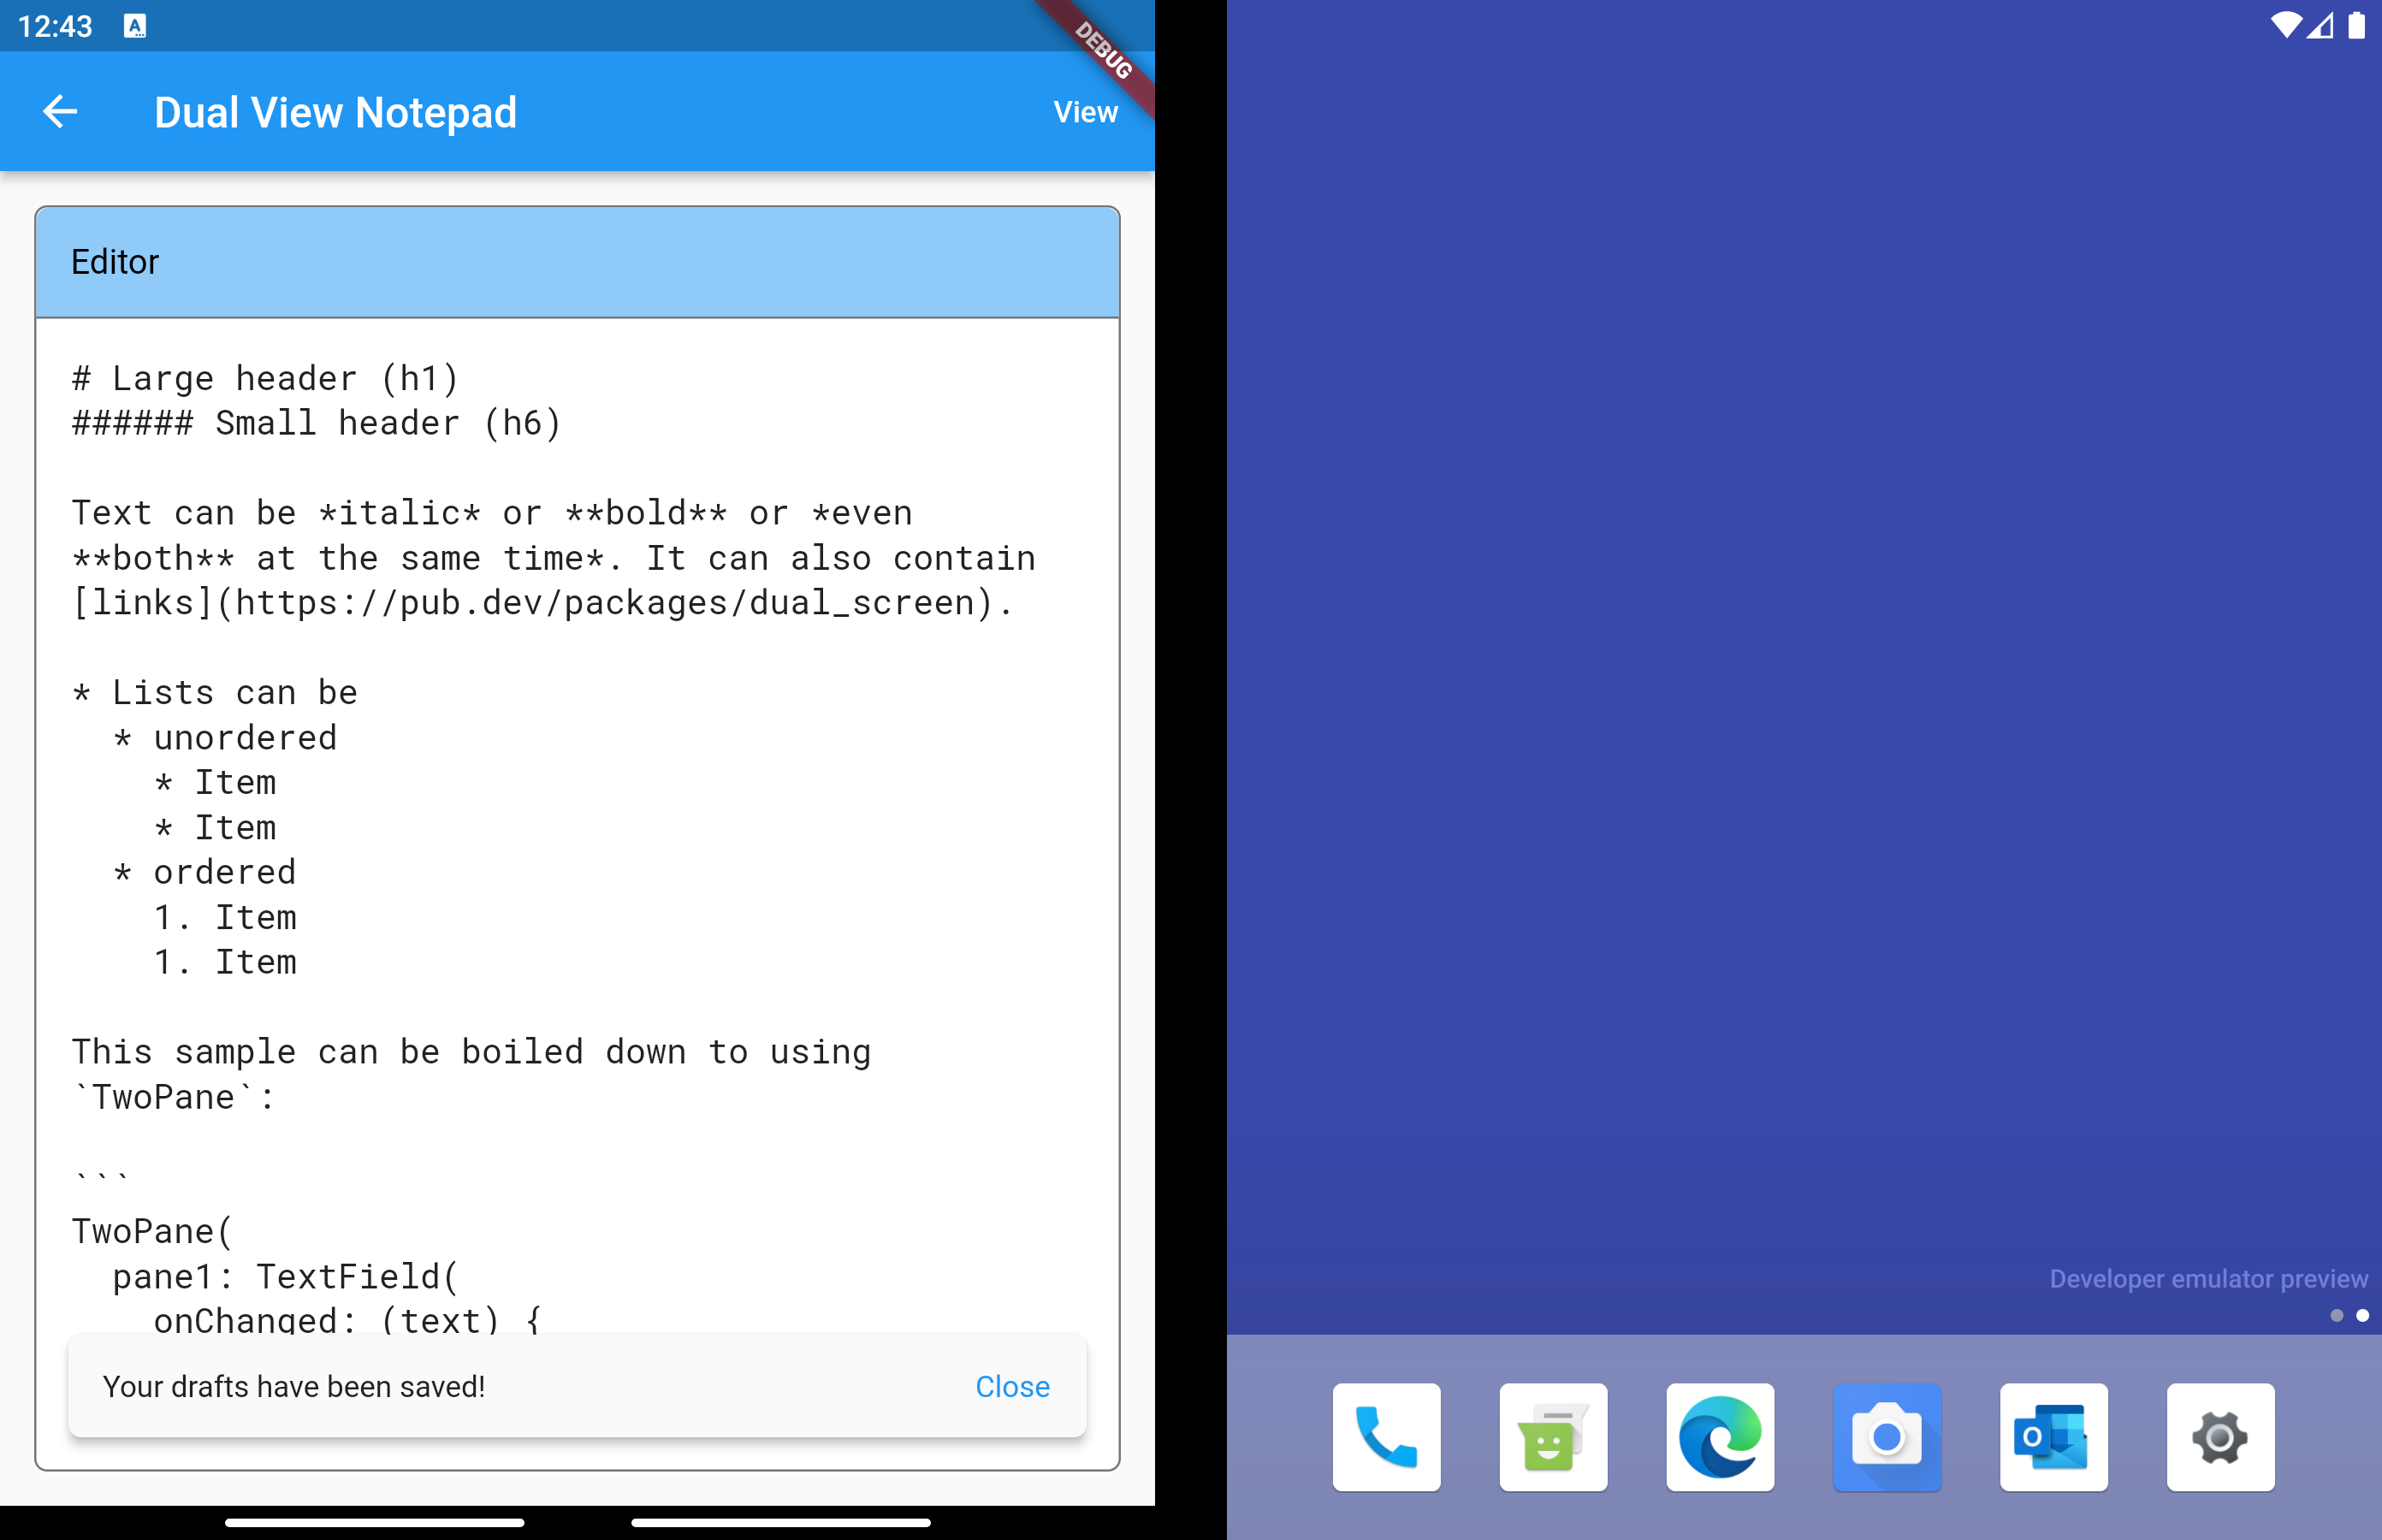 Flutter Dual View Notepad sample in single screen mode